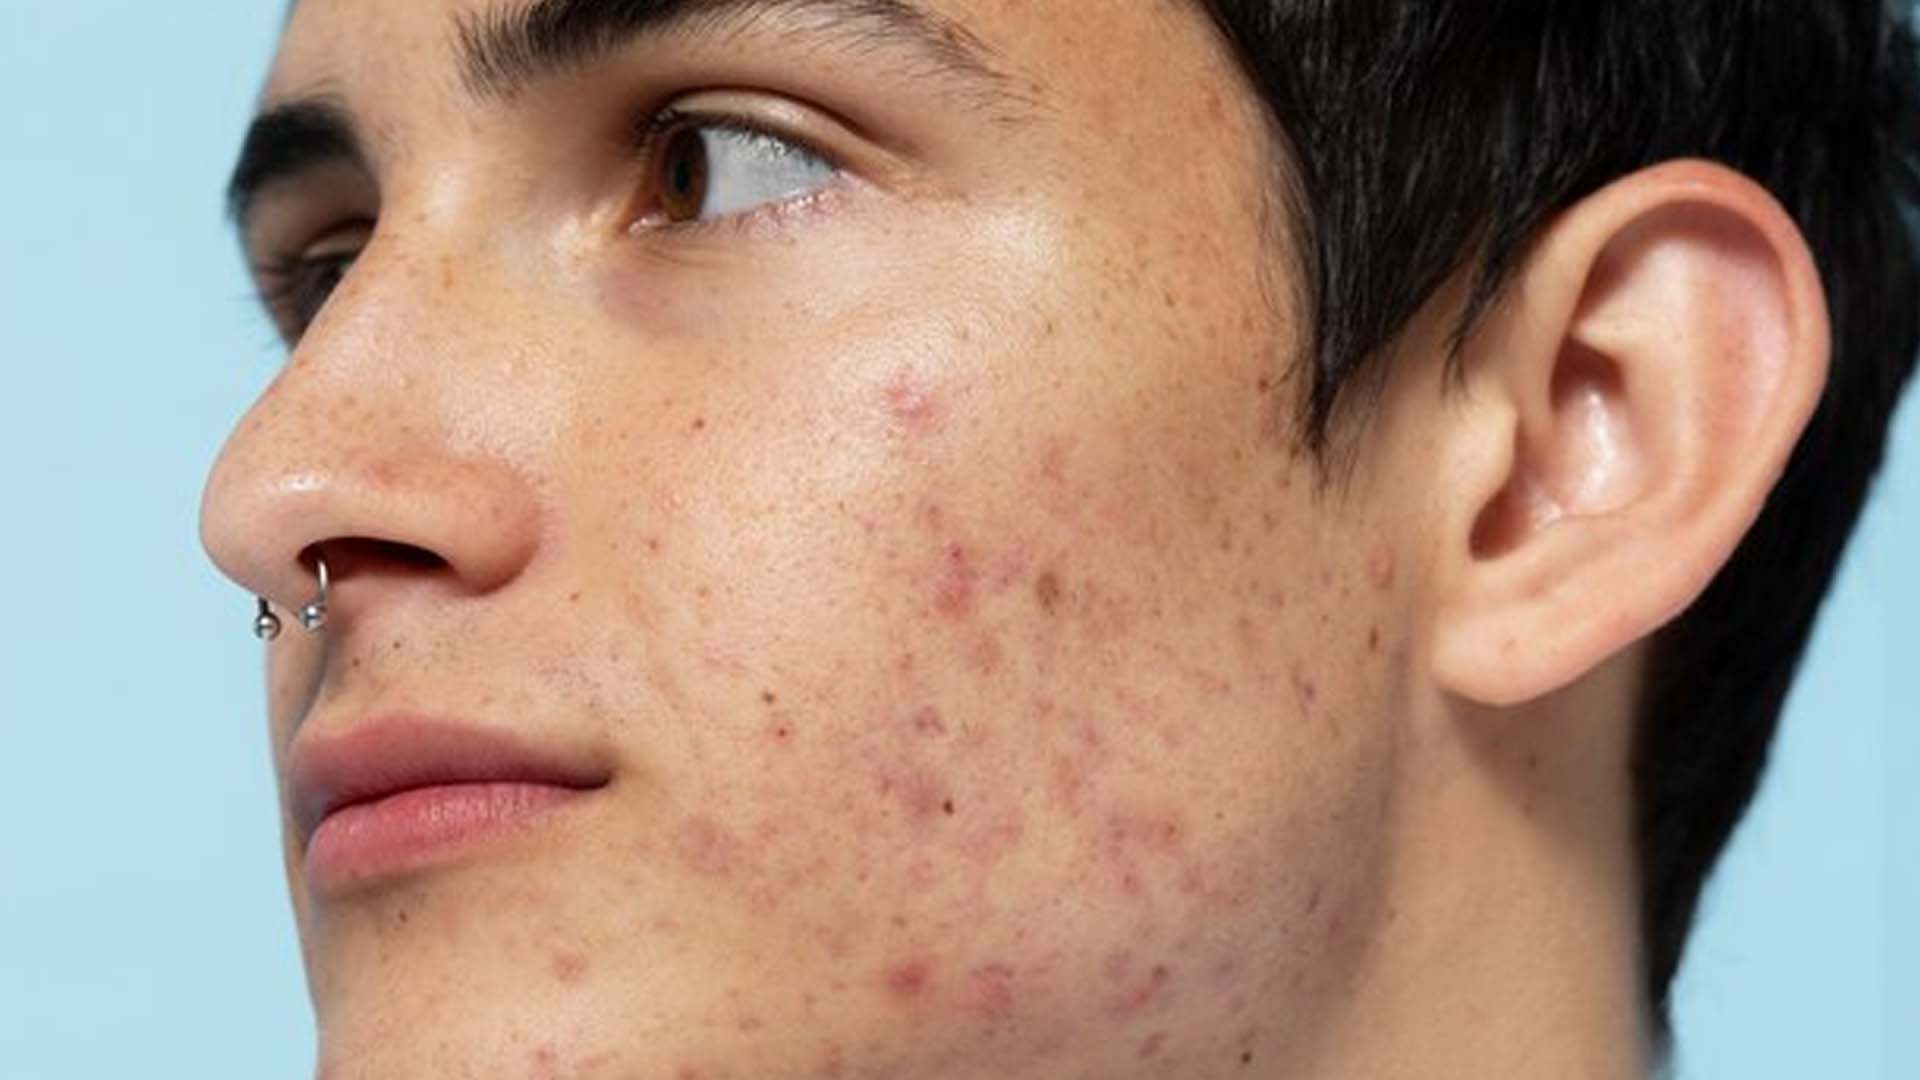 What are the Home Remedies to treat Cystic Acne?